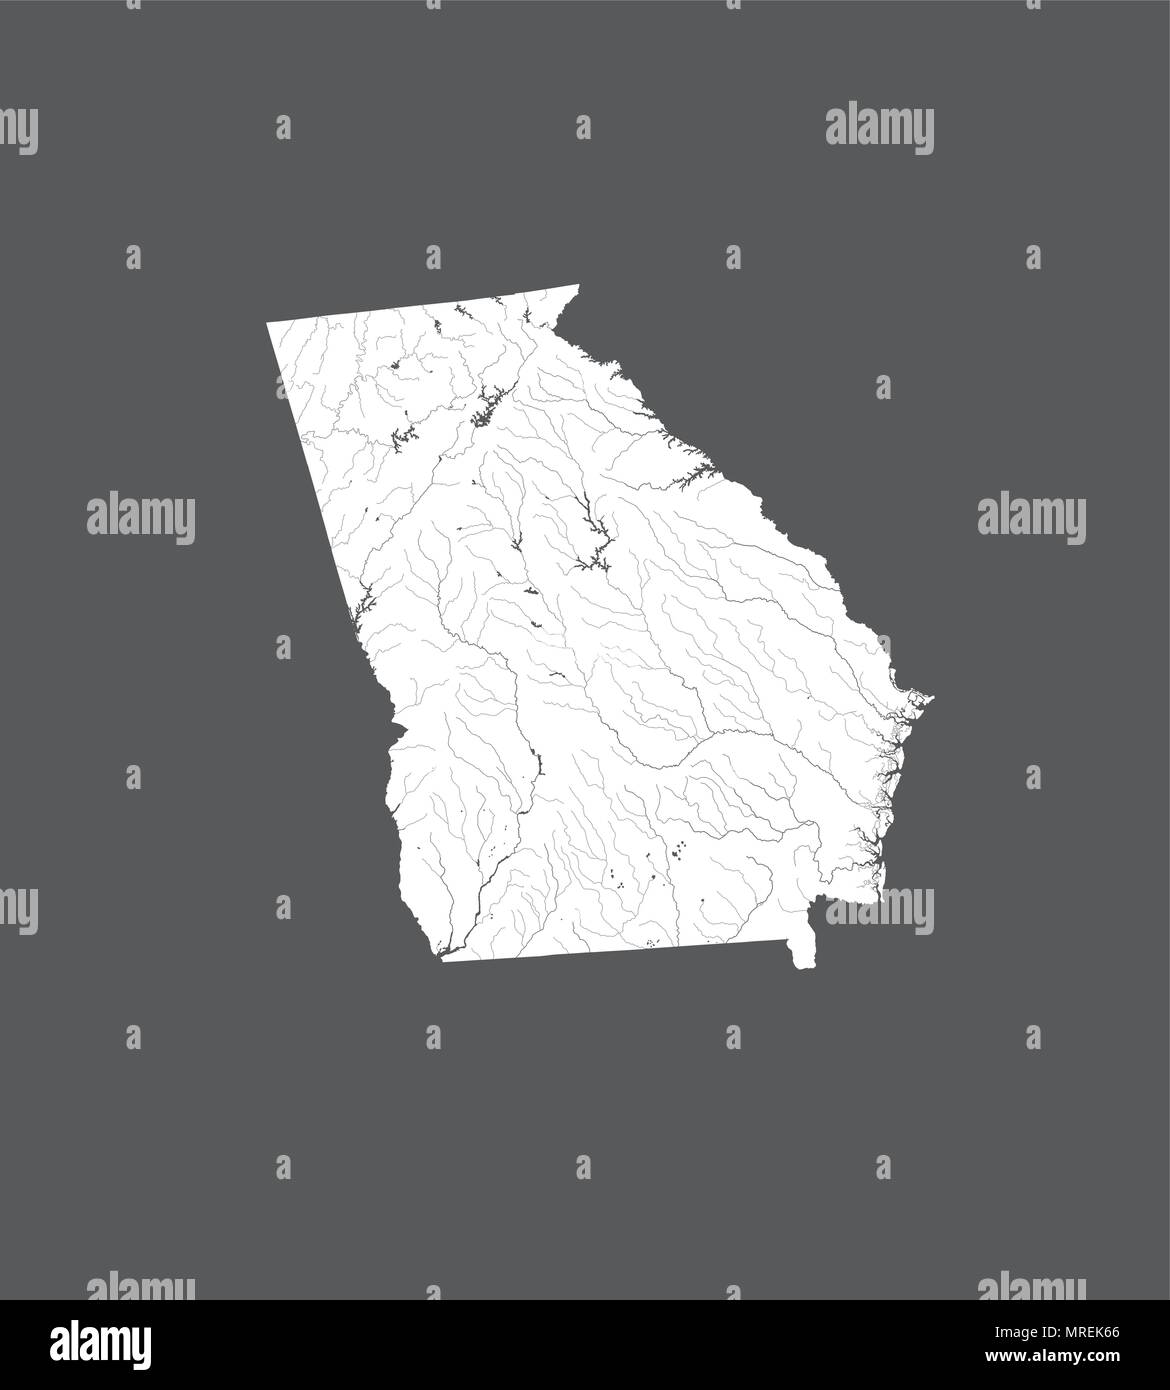 U.S. states - map of Georgia. Hand made. Rivers and lakes are shown. Please look at my other images of cartographic series - they are all very detaile Stock Vector